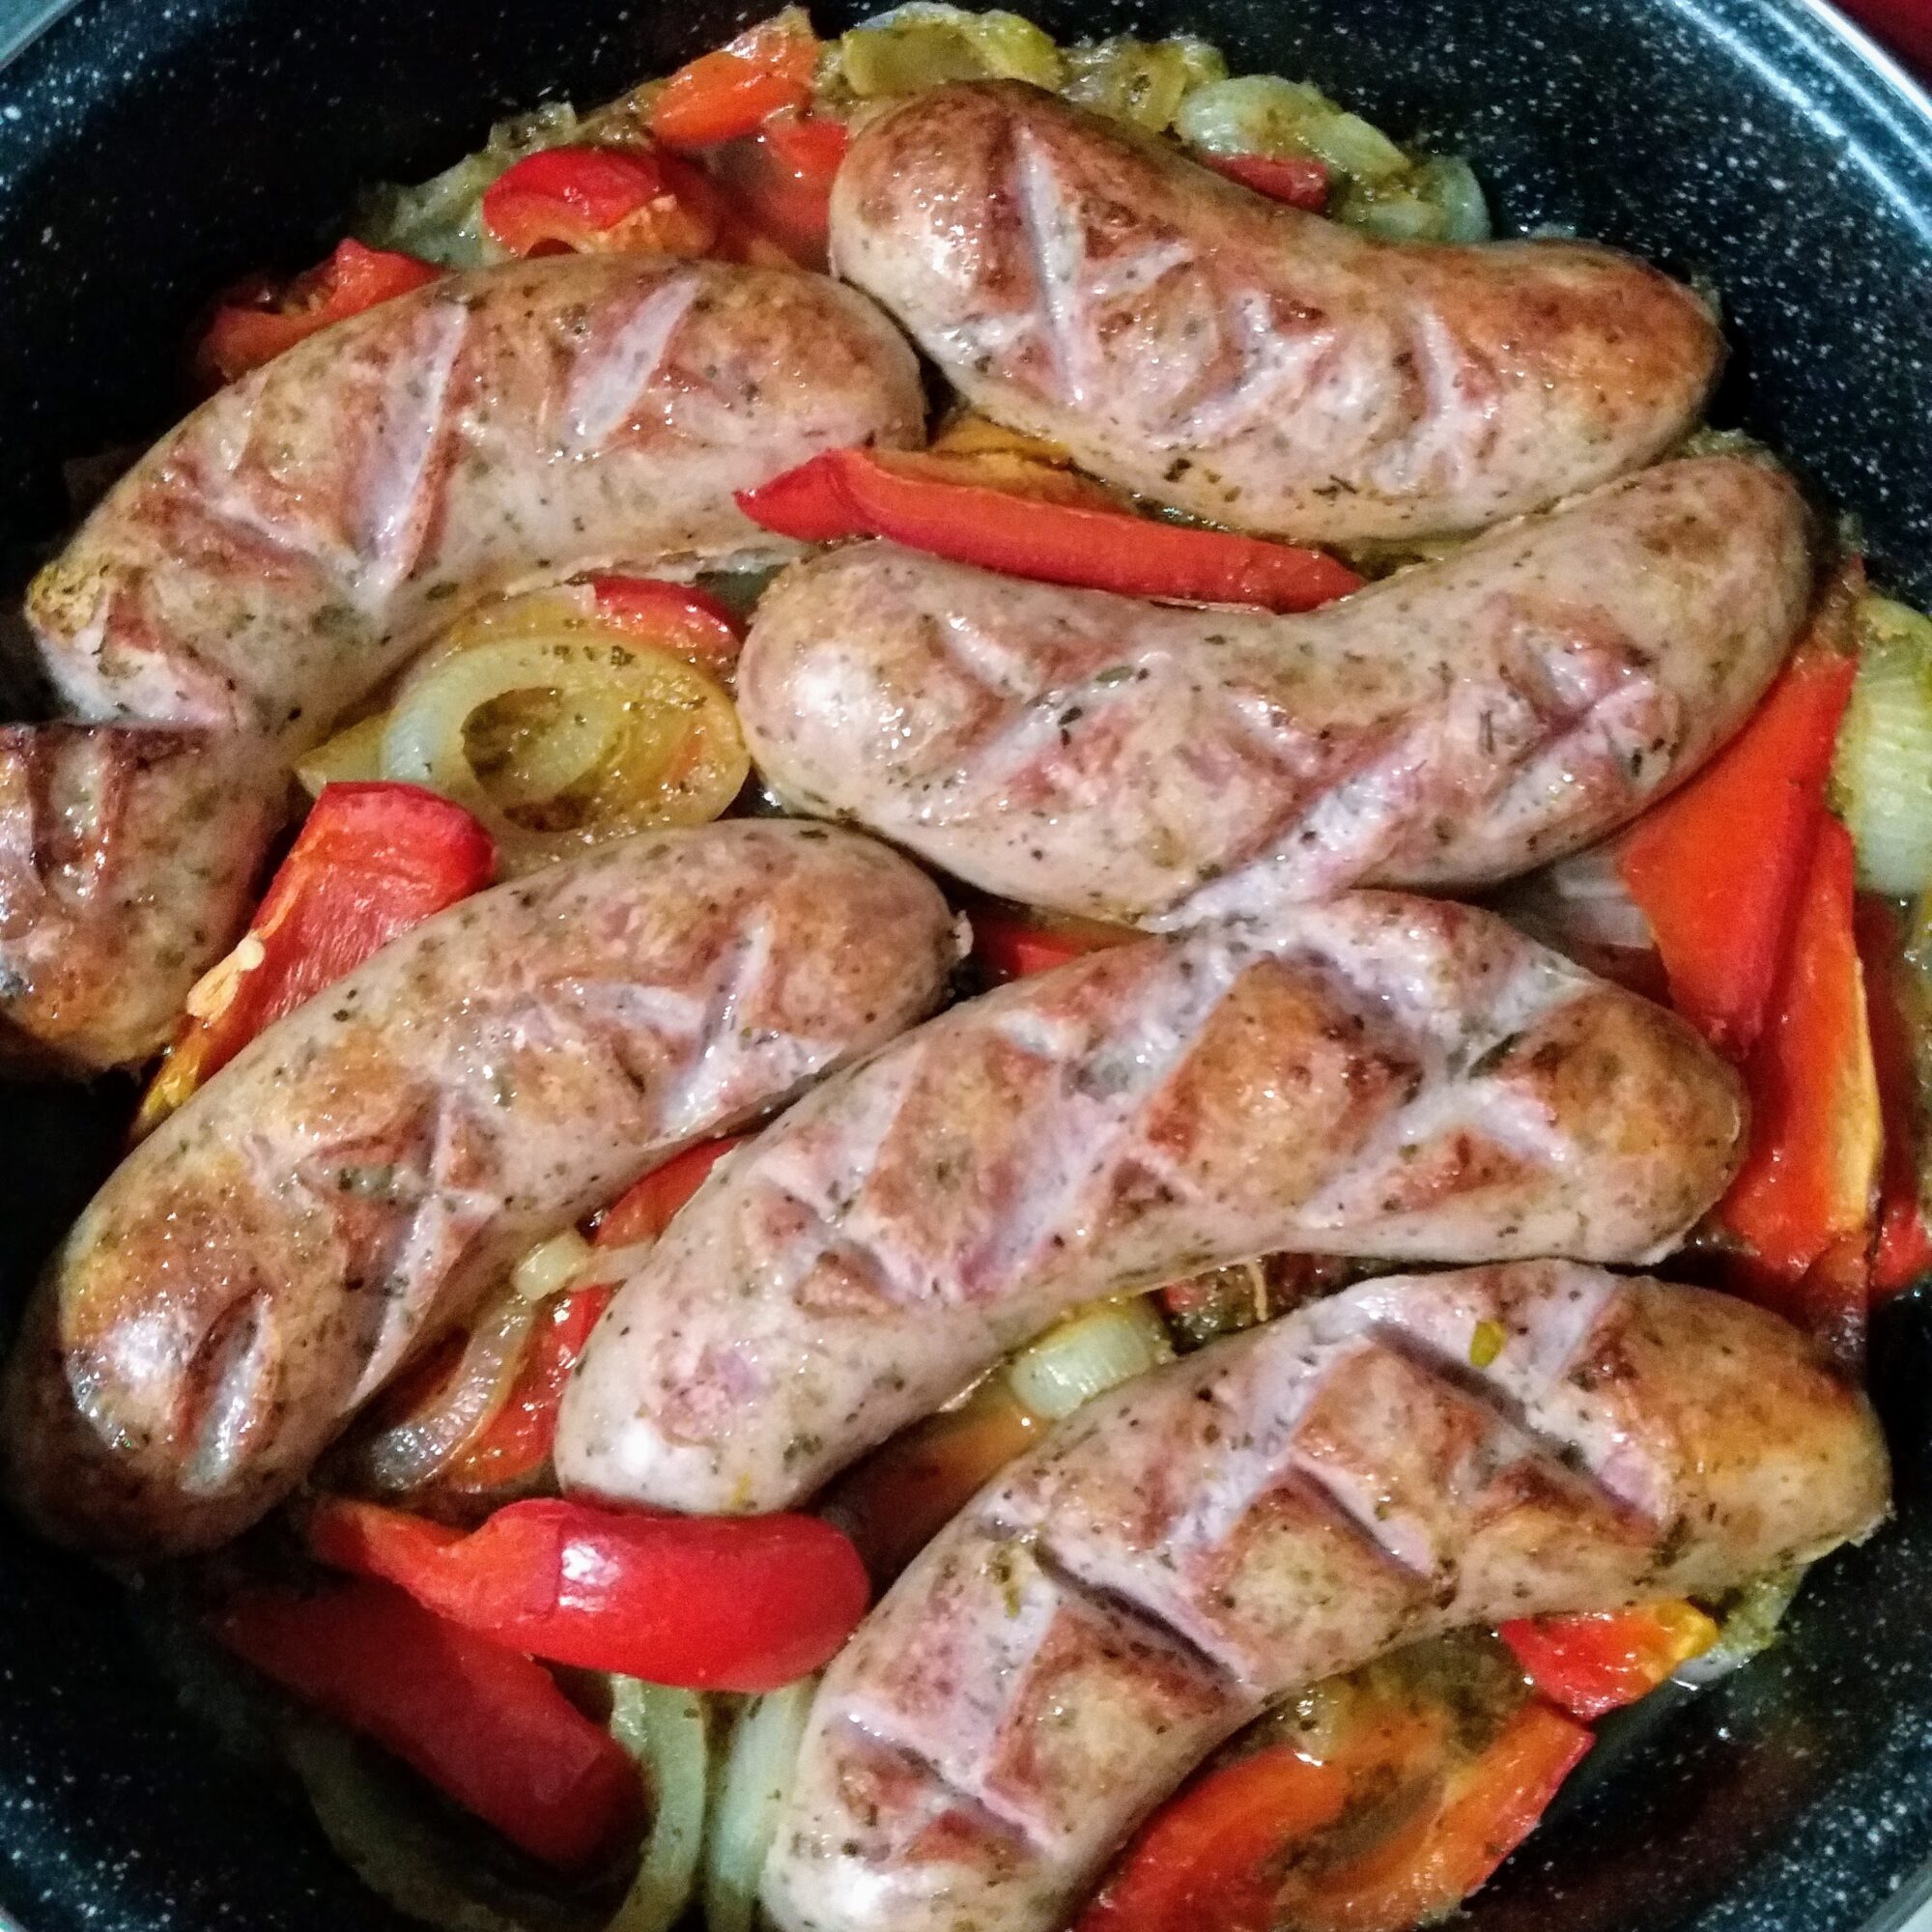 A pan of scored, white sausages with onion and red bell peppers.